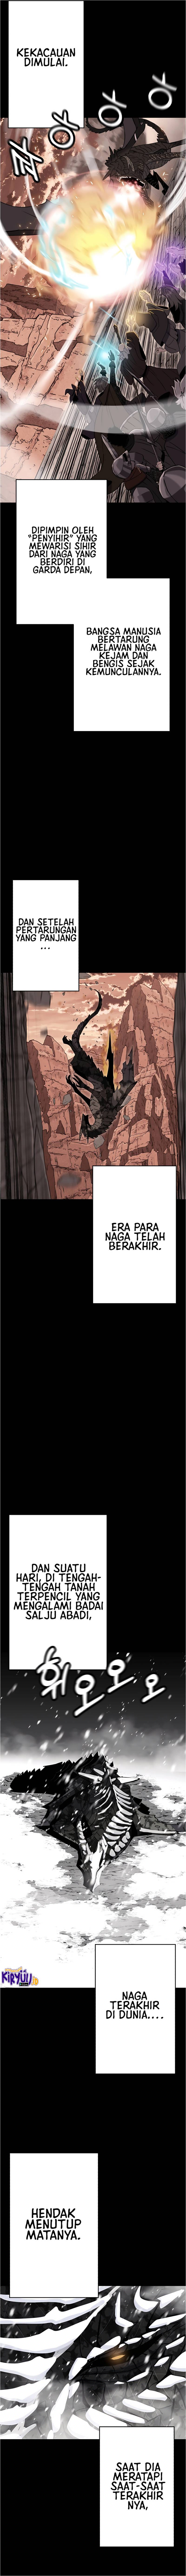 Dilarang COPAS - situs resmi www.mangacanblog.com - Komik the story of a low rank soldier becoming a monarch 138 - chapter 138 139 Indonesia the story of a low rank soldier becoming a monarch 138 - chapter 138 Terbaru 1|Baca Manga Komik Indonesia|Mangacan